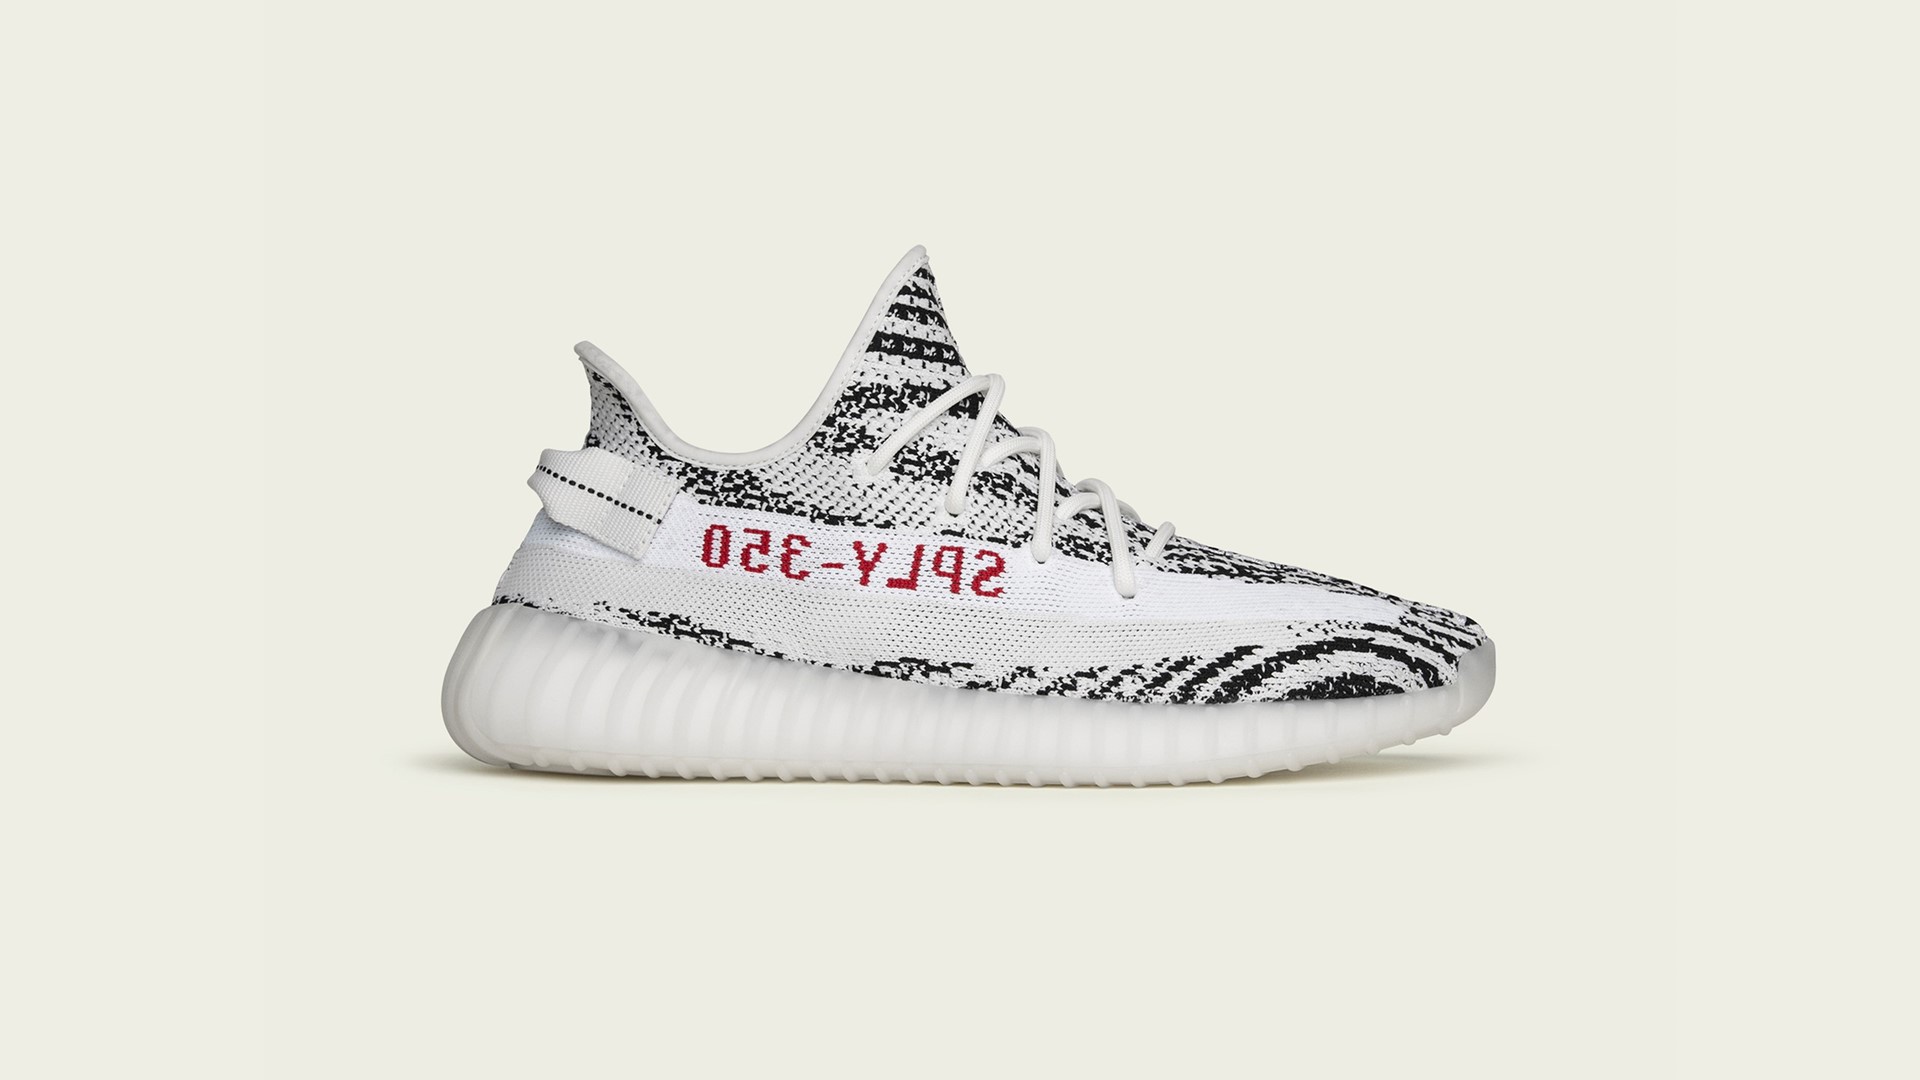 cueva compromiso representante adidas + KANYE WEST announce the YEEZY BOOST 350 V2 White/Core Black/Red